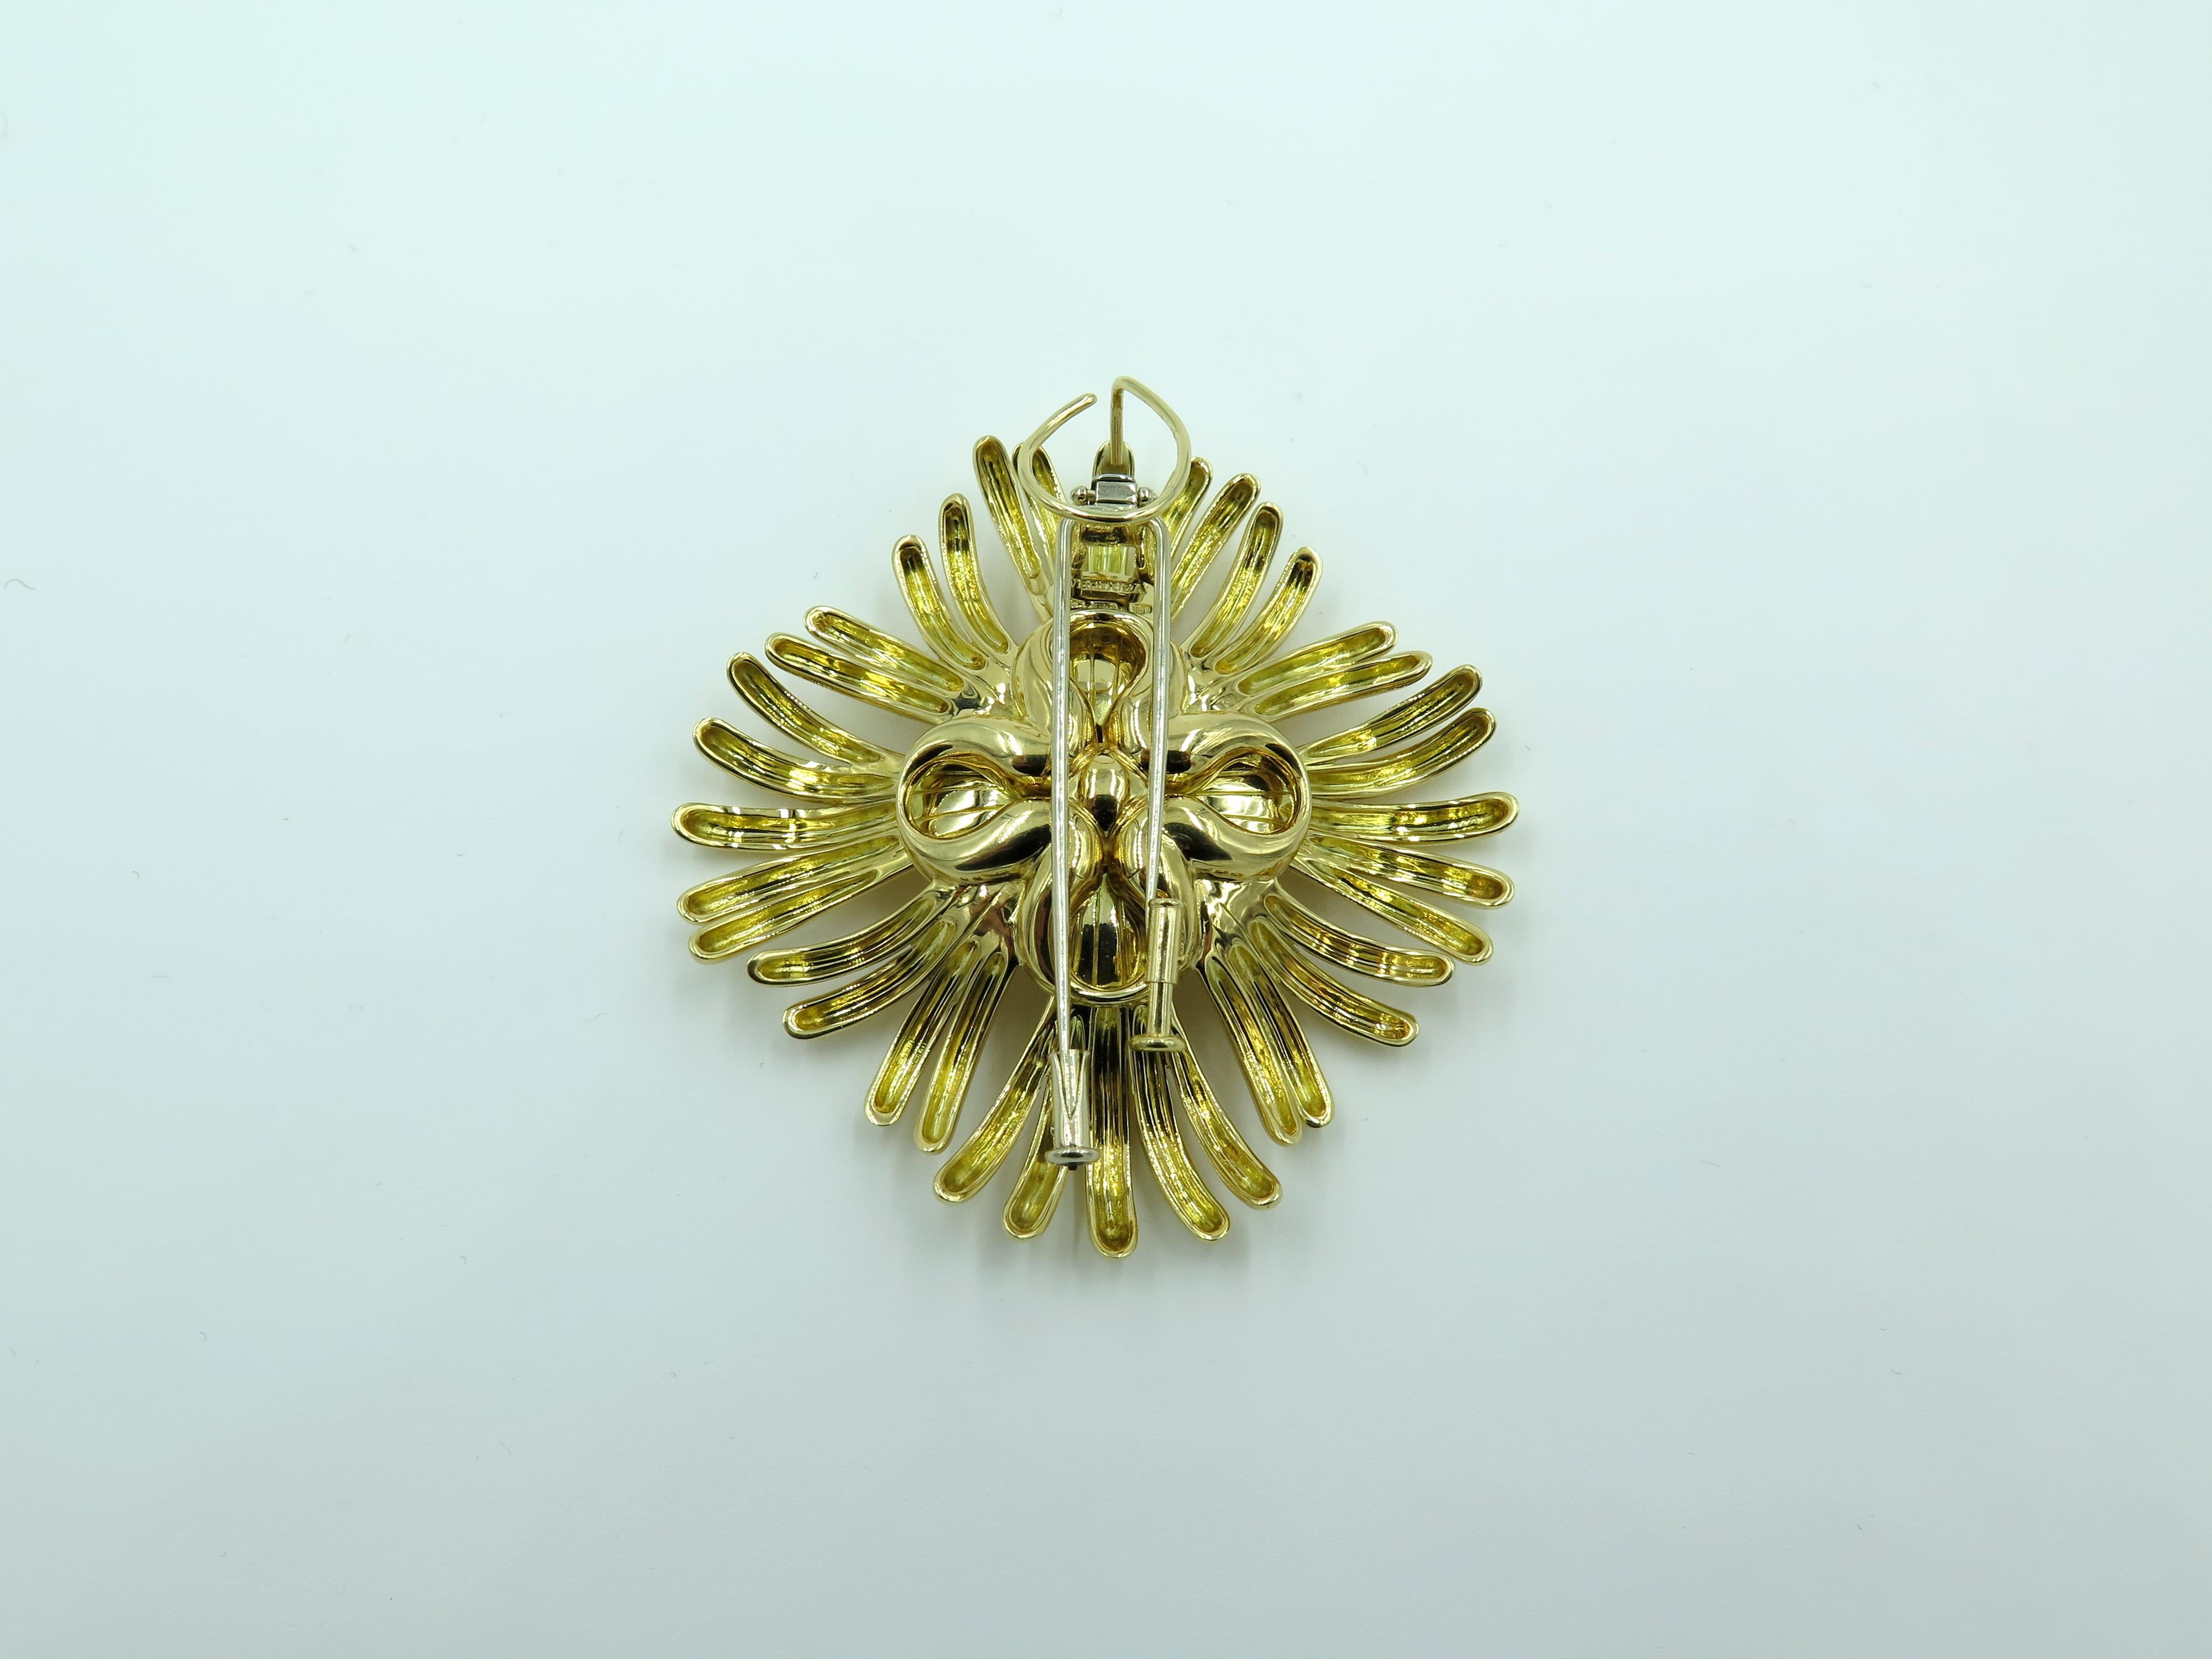 An 18 karat yellow gold brooch. Verdura. Designed as a polished gold Maltese cross spray. Length is approximately 2 1/2 inches, gross weight is approximately 52.8 grams. 